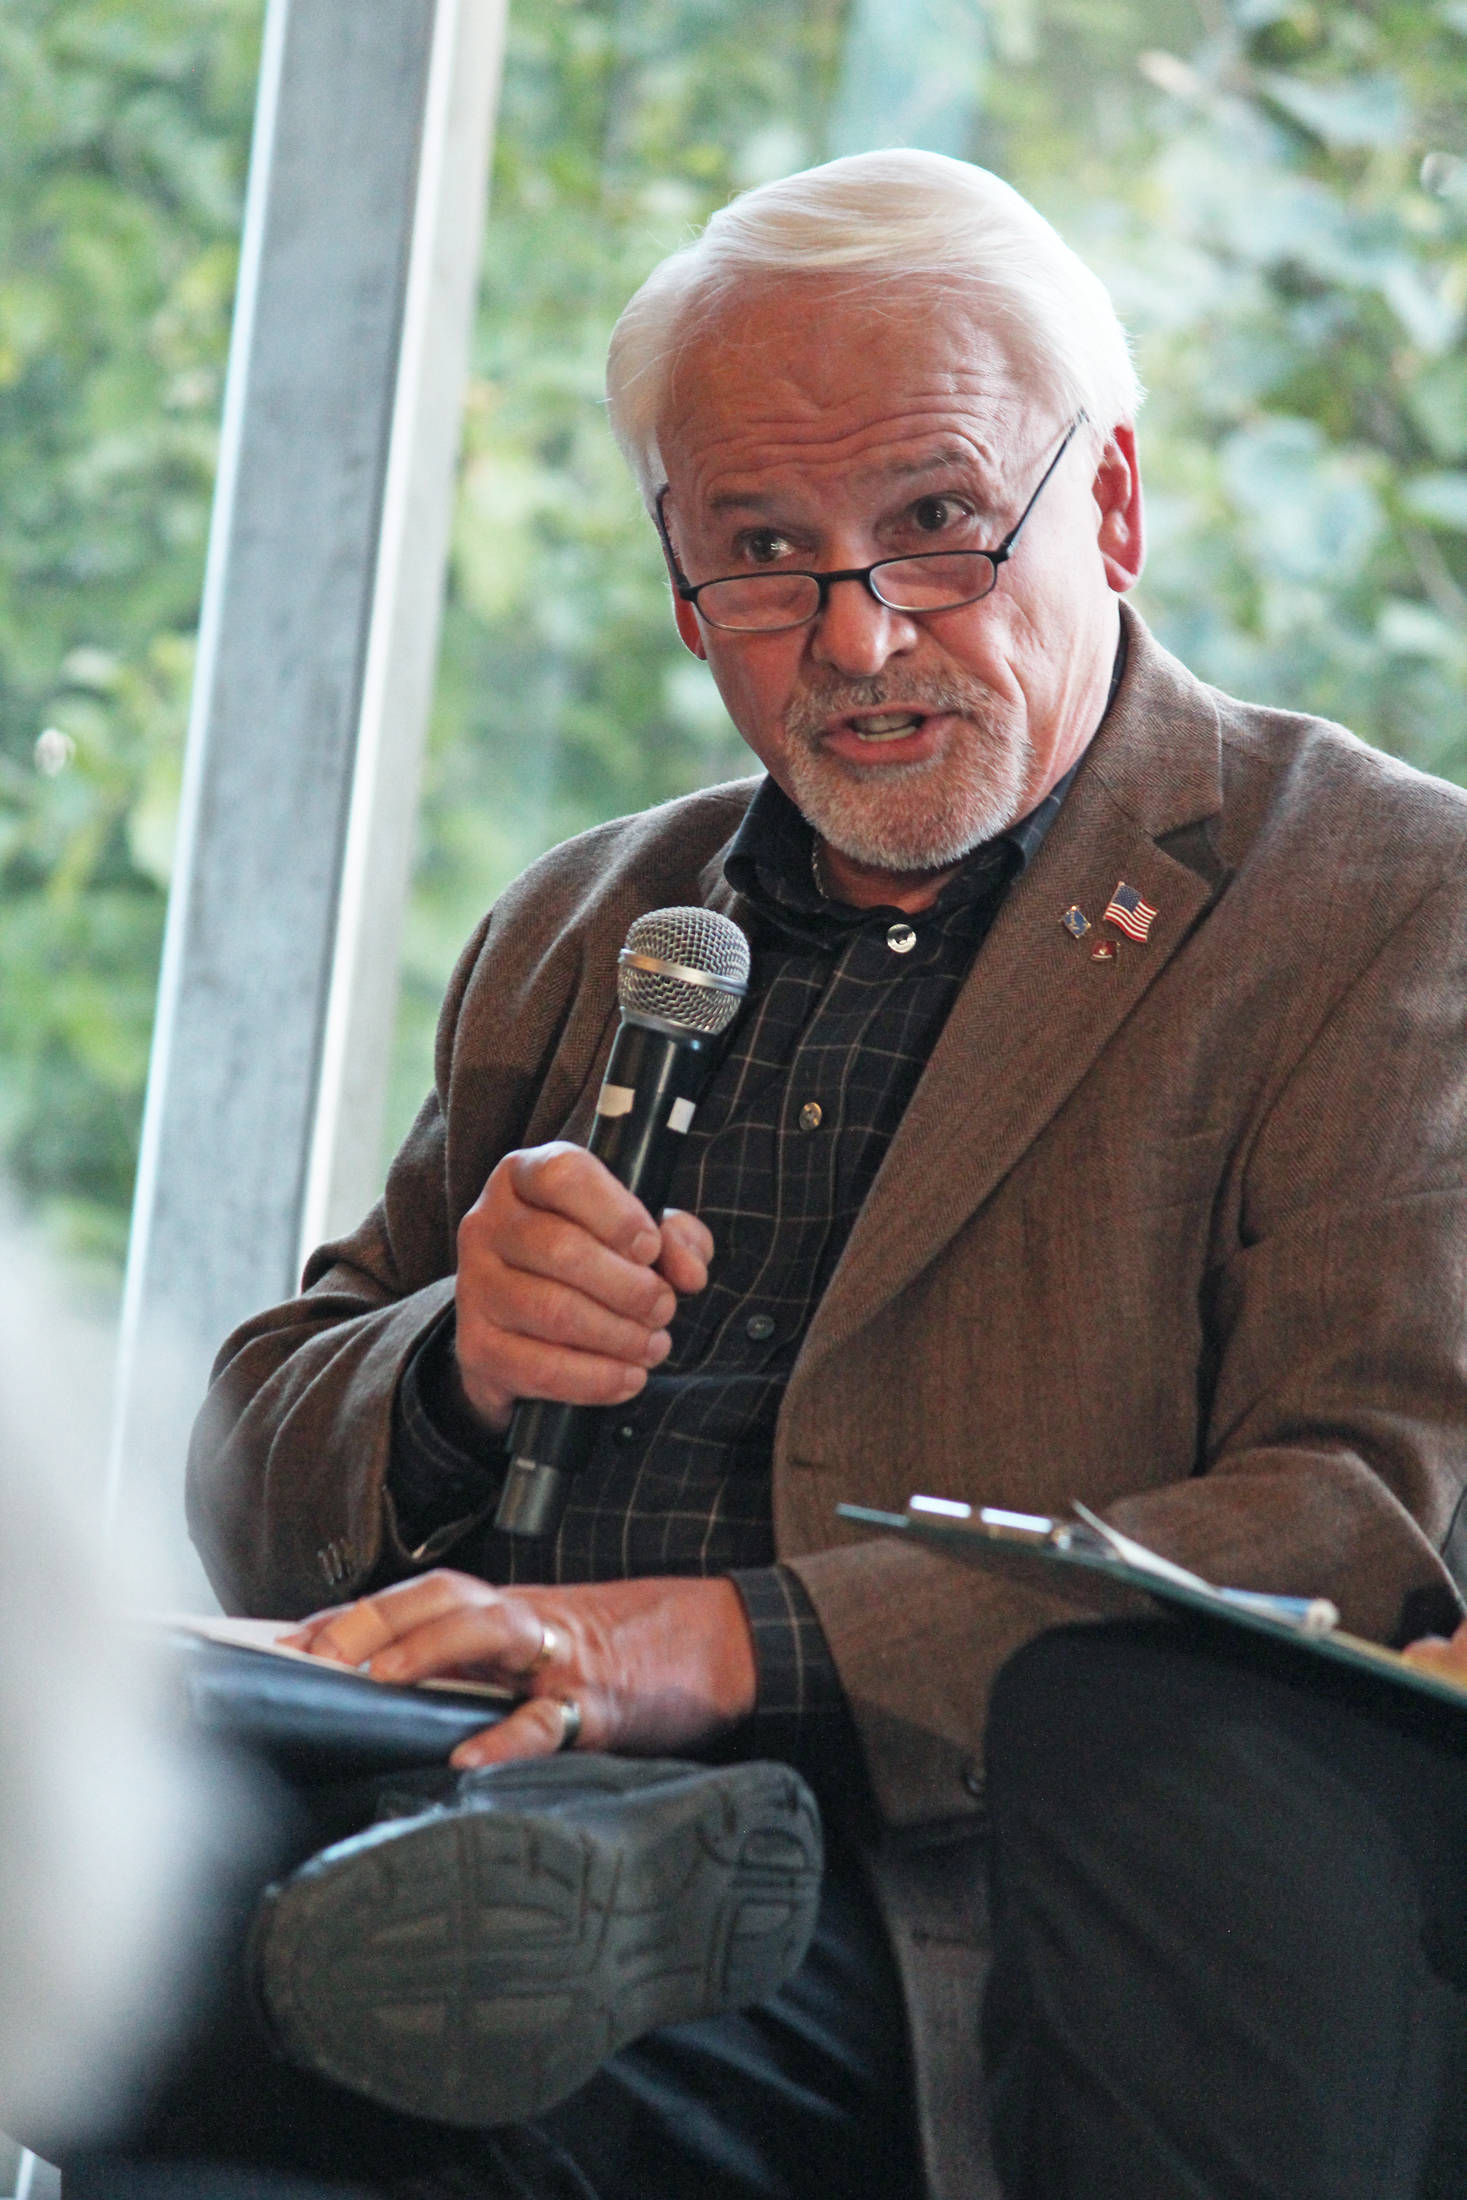 Tom Stroozas, a Homer City Council member who is running for re-election, speaks during a candidate forum Wednesday, Sept. 25, 2019 at the Homer Public Library in Homer, Alaska. Stroozas is contesting the election, claiming Storm Hansen-Cavasos is not a qualified resident of Homer. (Photo by Megan Pacer/Homer News)